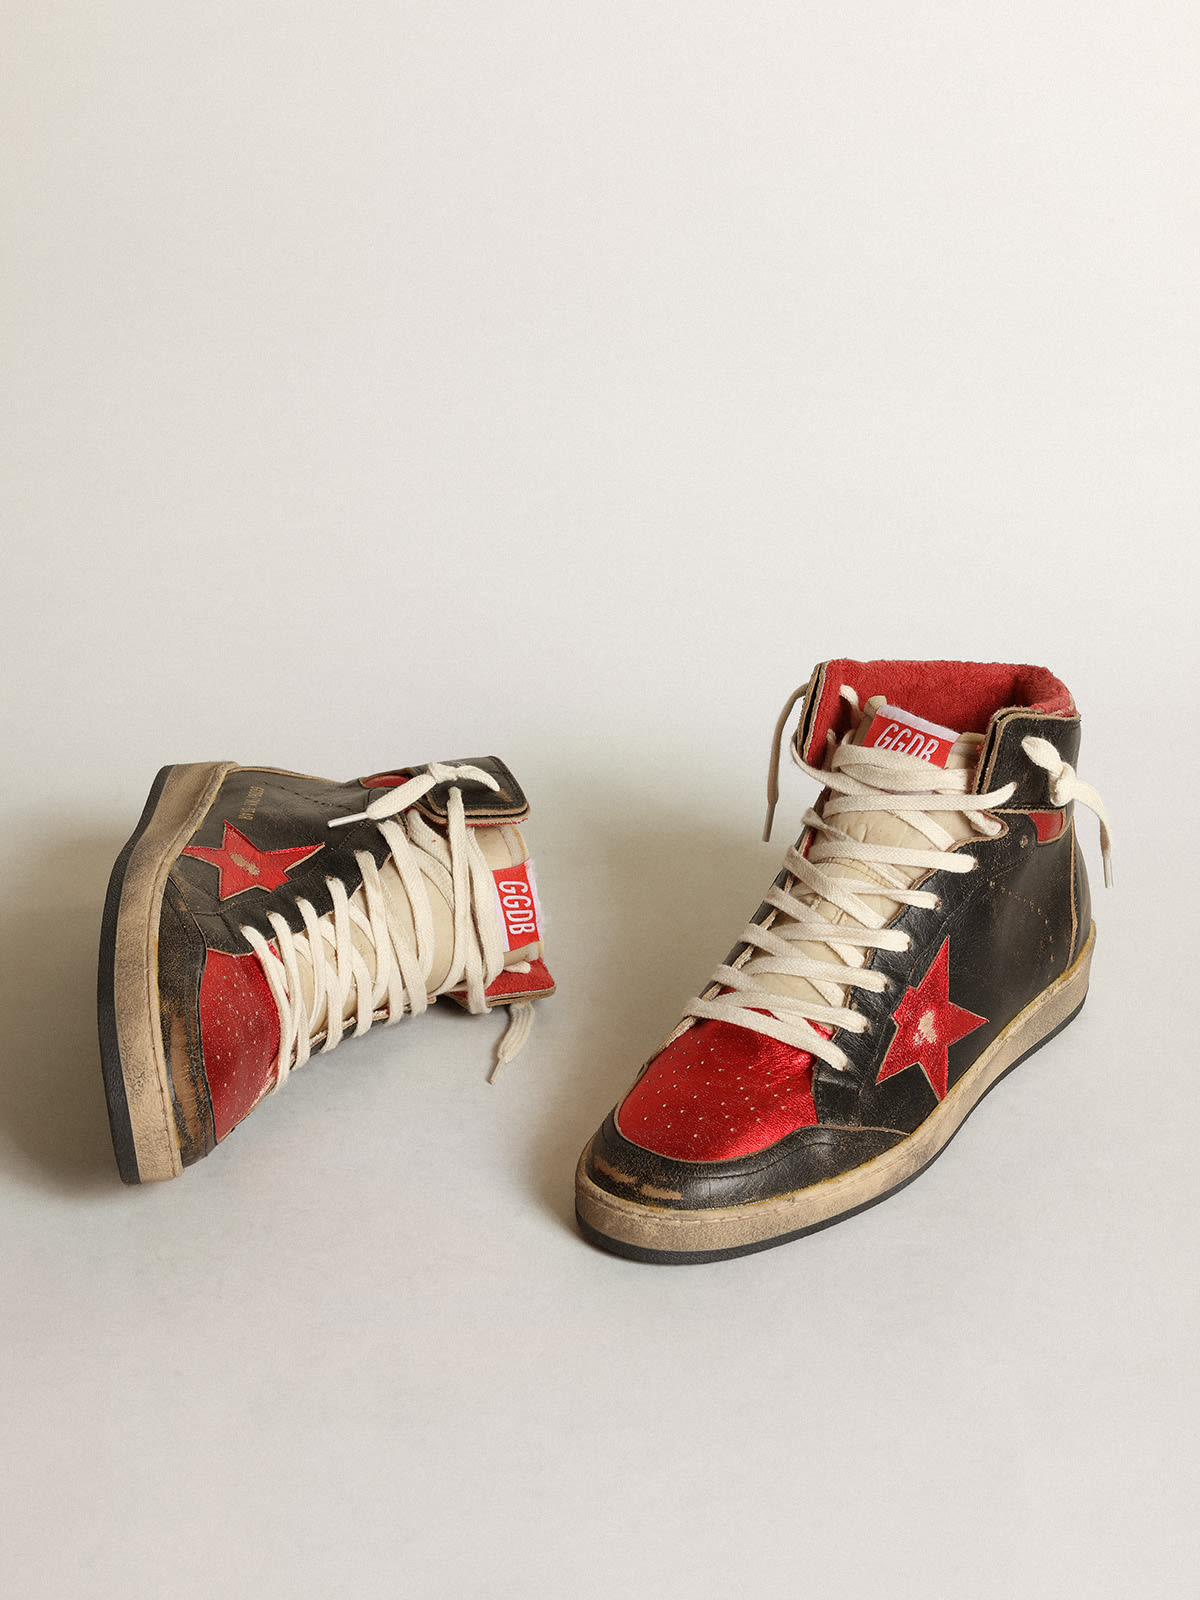 Golden Goose - Sky-Star Men’s sneakers in glossy black leather with red metallic leather star in 